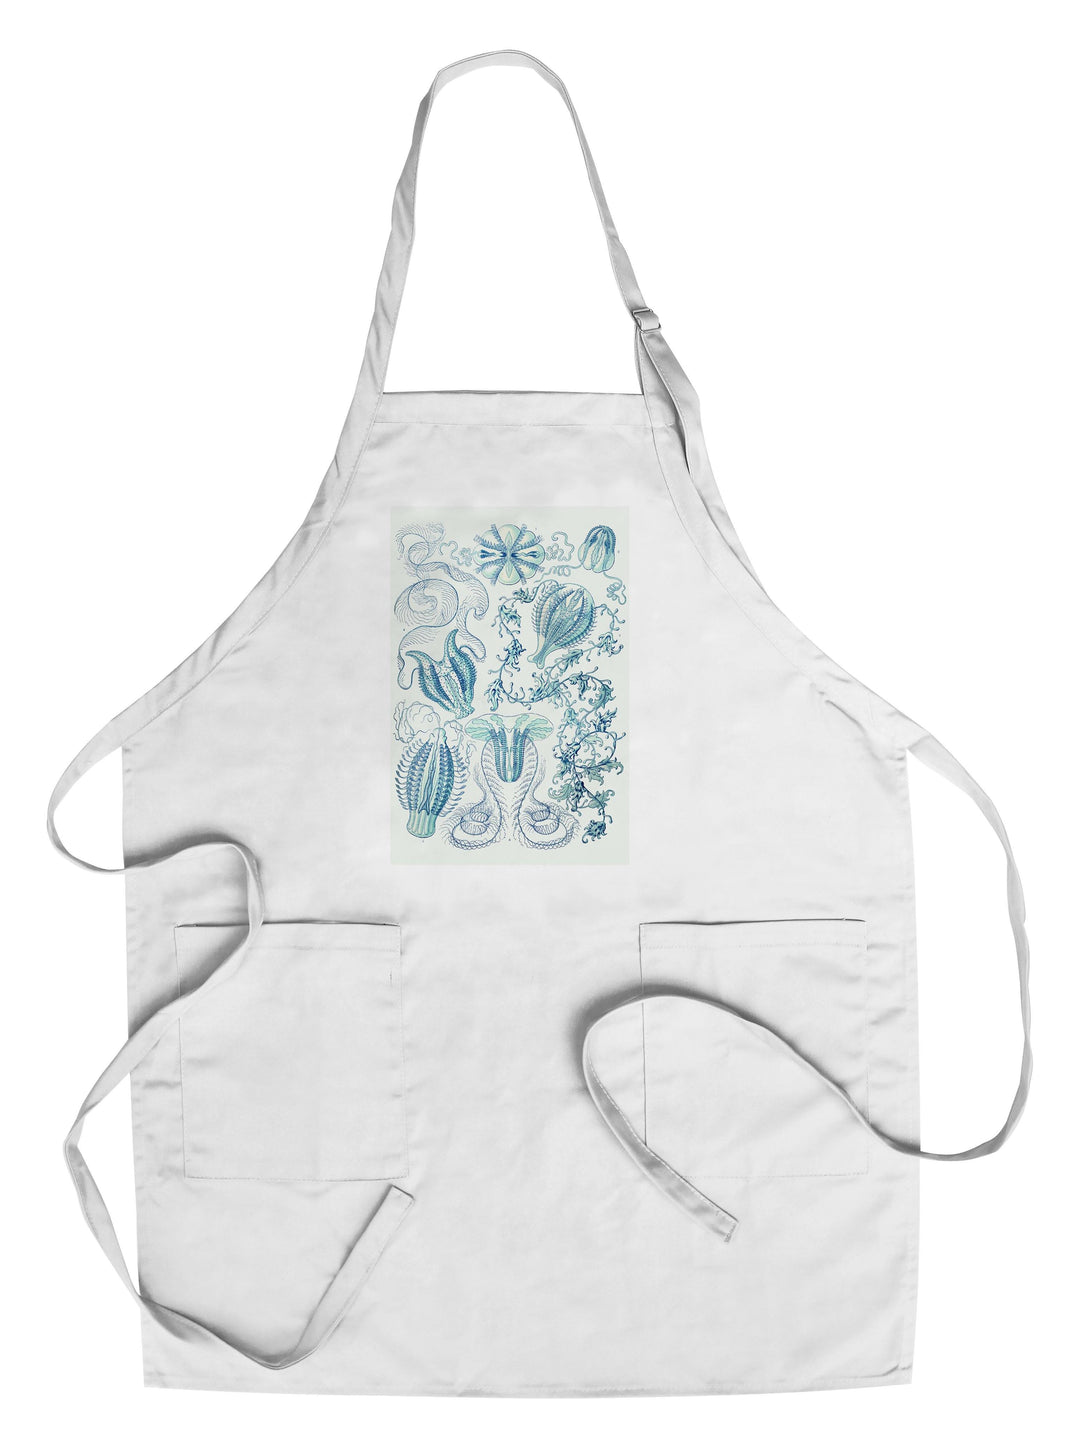 Art Forms of Nature, Ctenophorae, Ernst Haeckel Artwork, Towels and Aprons Kitchen Lantern Press 